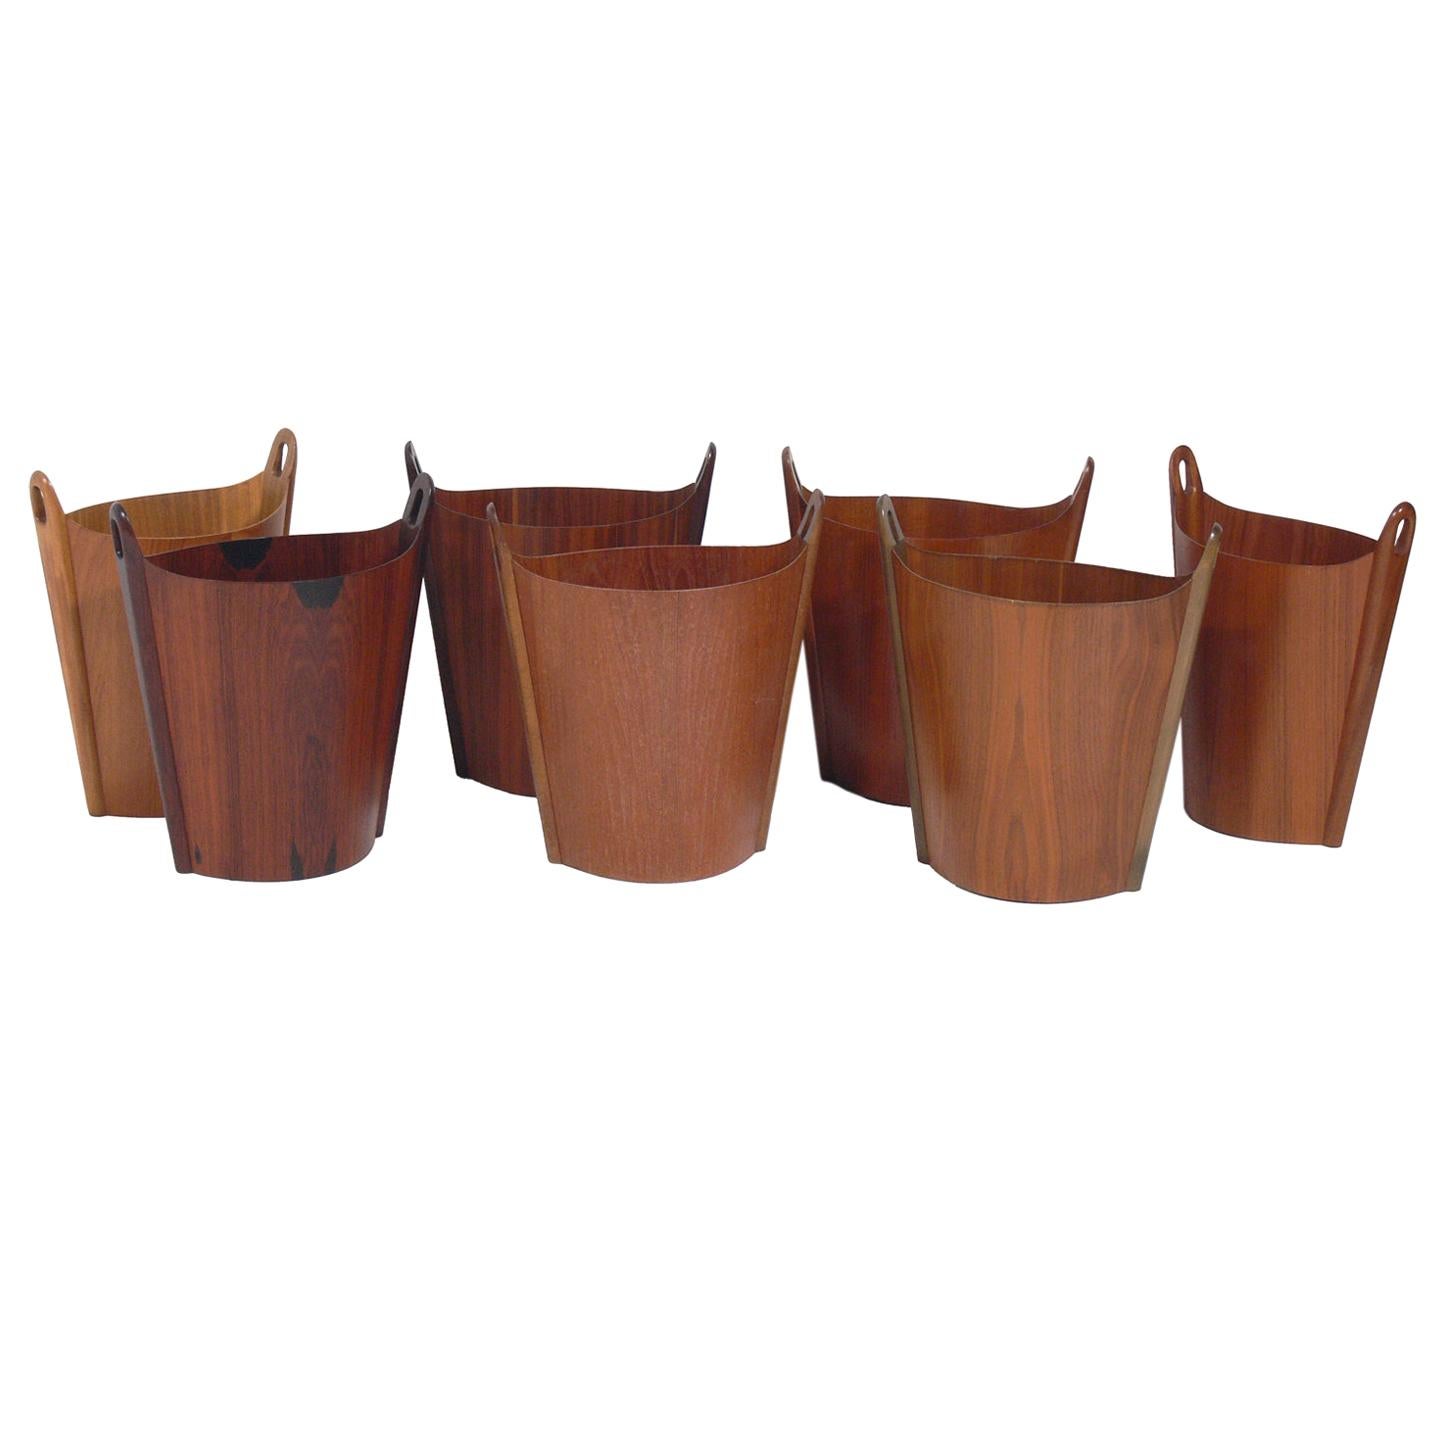 Selection of Danish Modern Waste Cans by Einar Barnes for P.S. Heggen